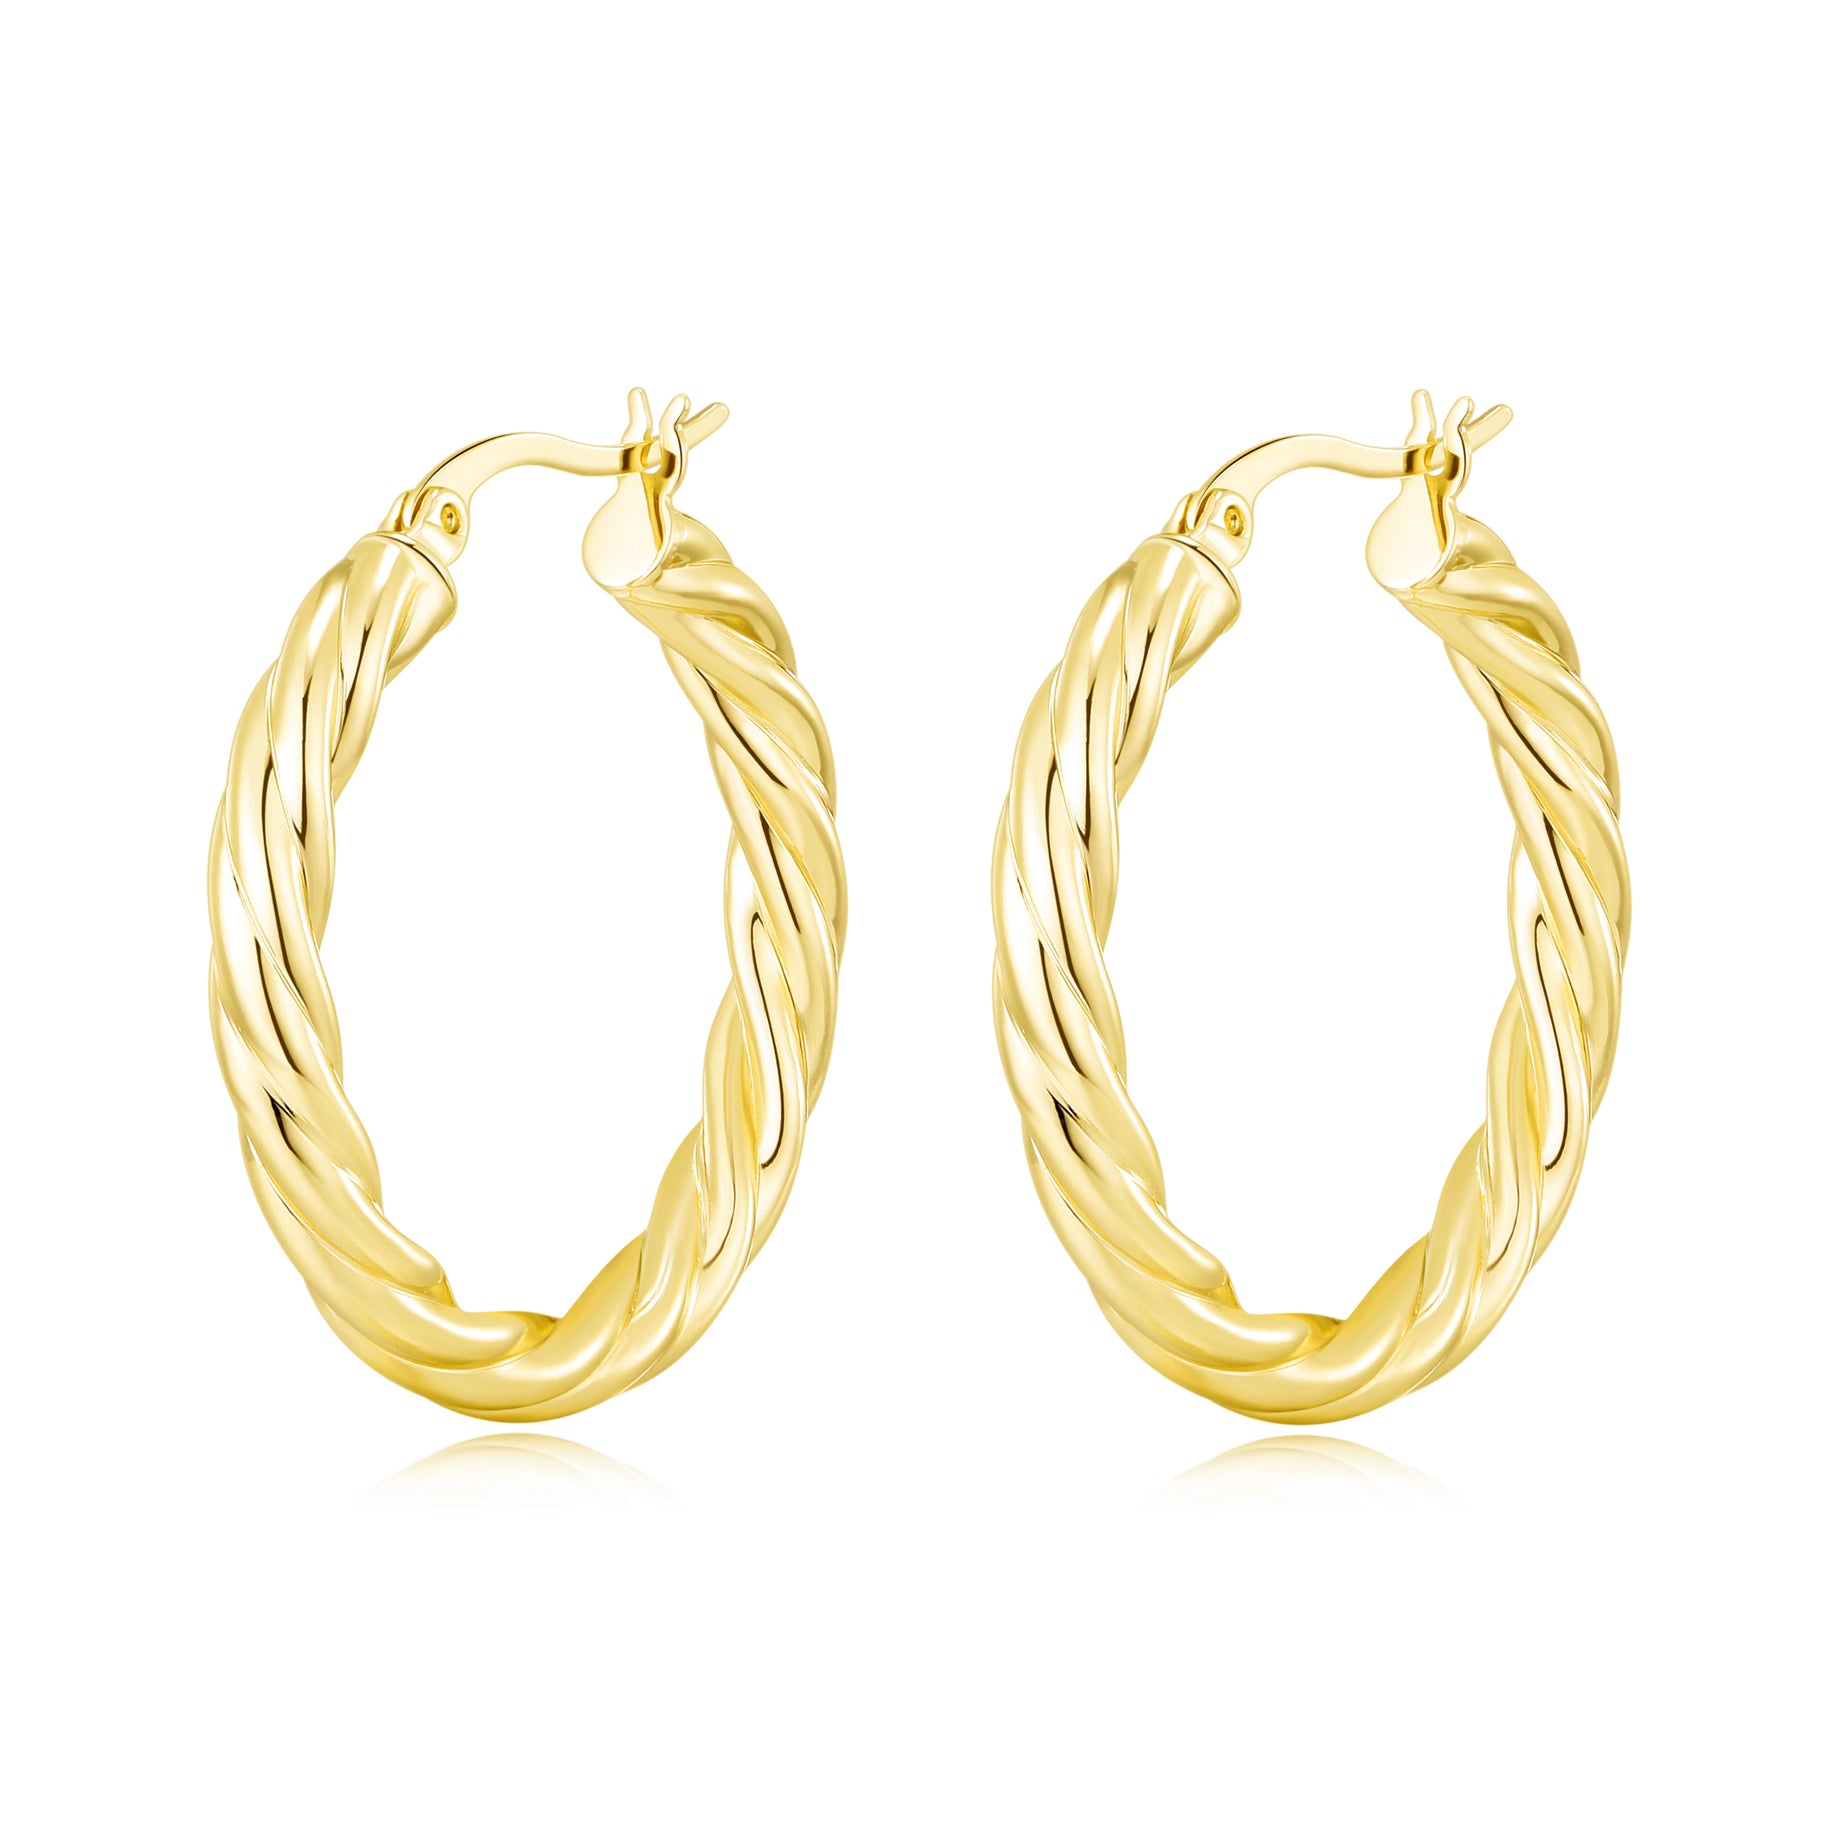 Gold Plated Thick Twisted Hoop Earrings by Philip Jones Jewellery